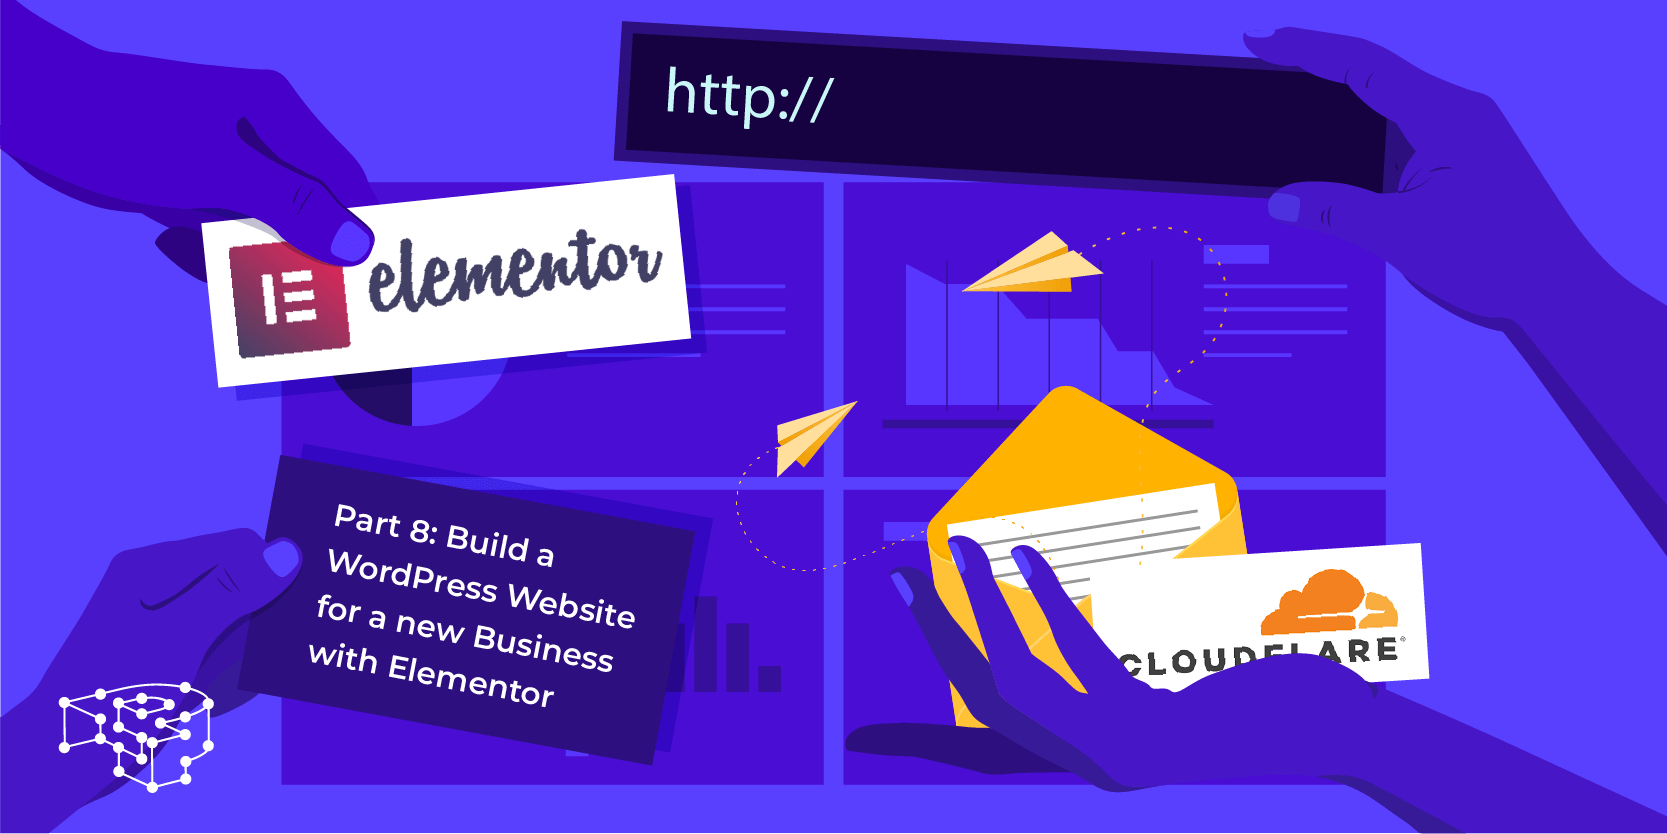 Build a WordPress Website for a new Business with Elementor